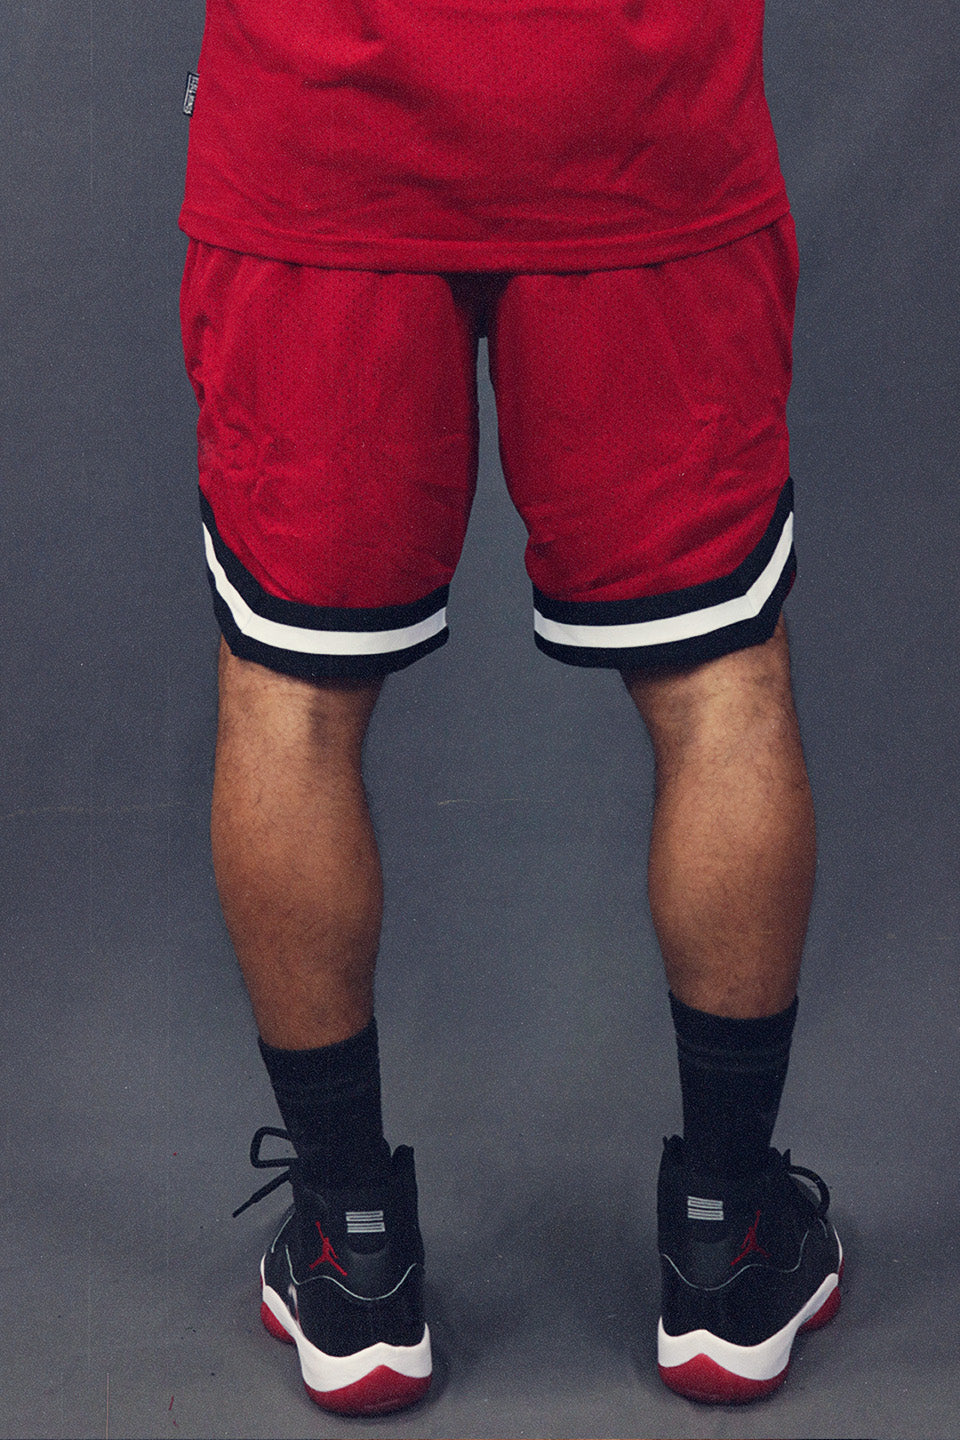 Back of the Men's Hooper Basketball Workout Red Chicago Mesh Retro Shorts